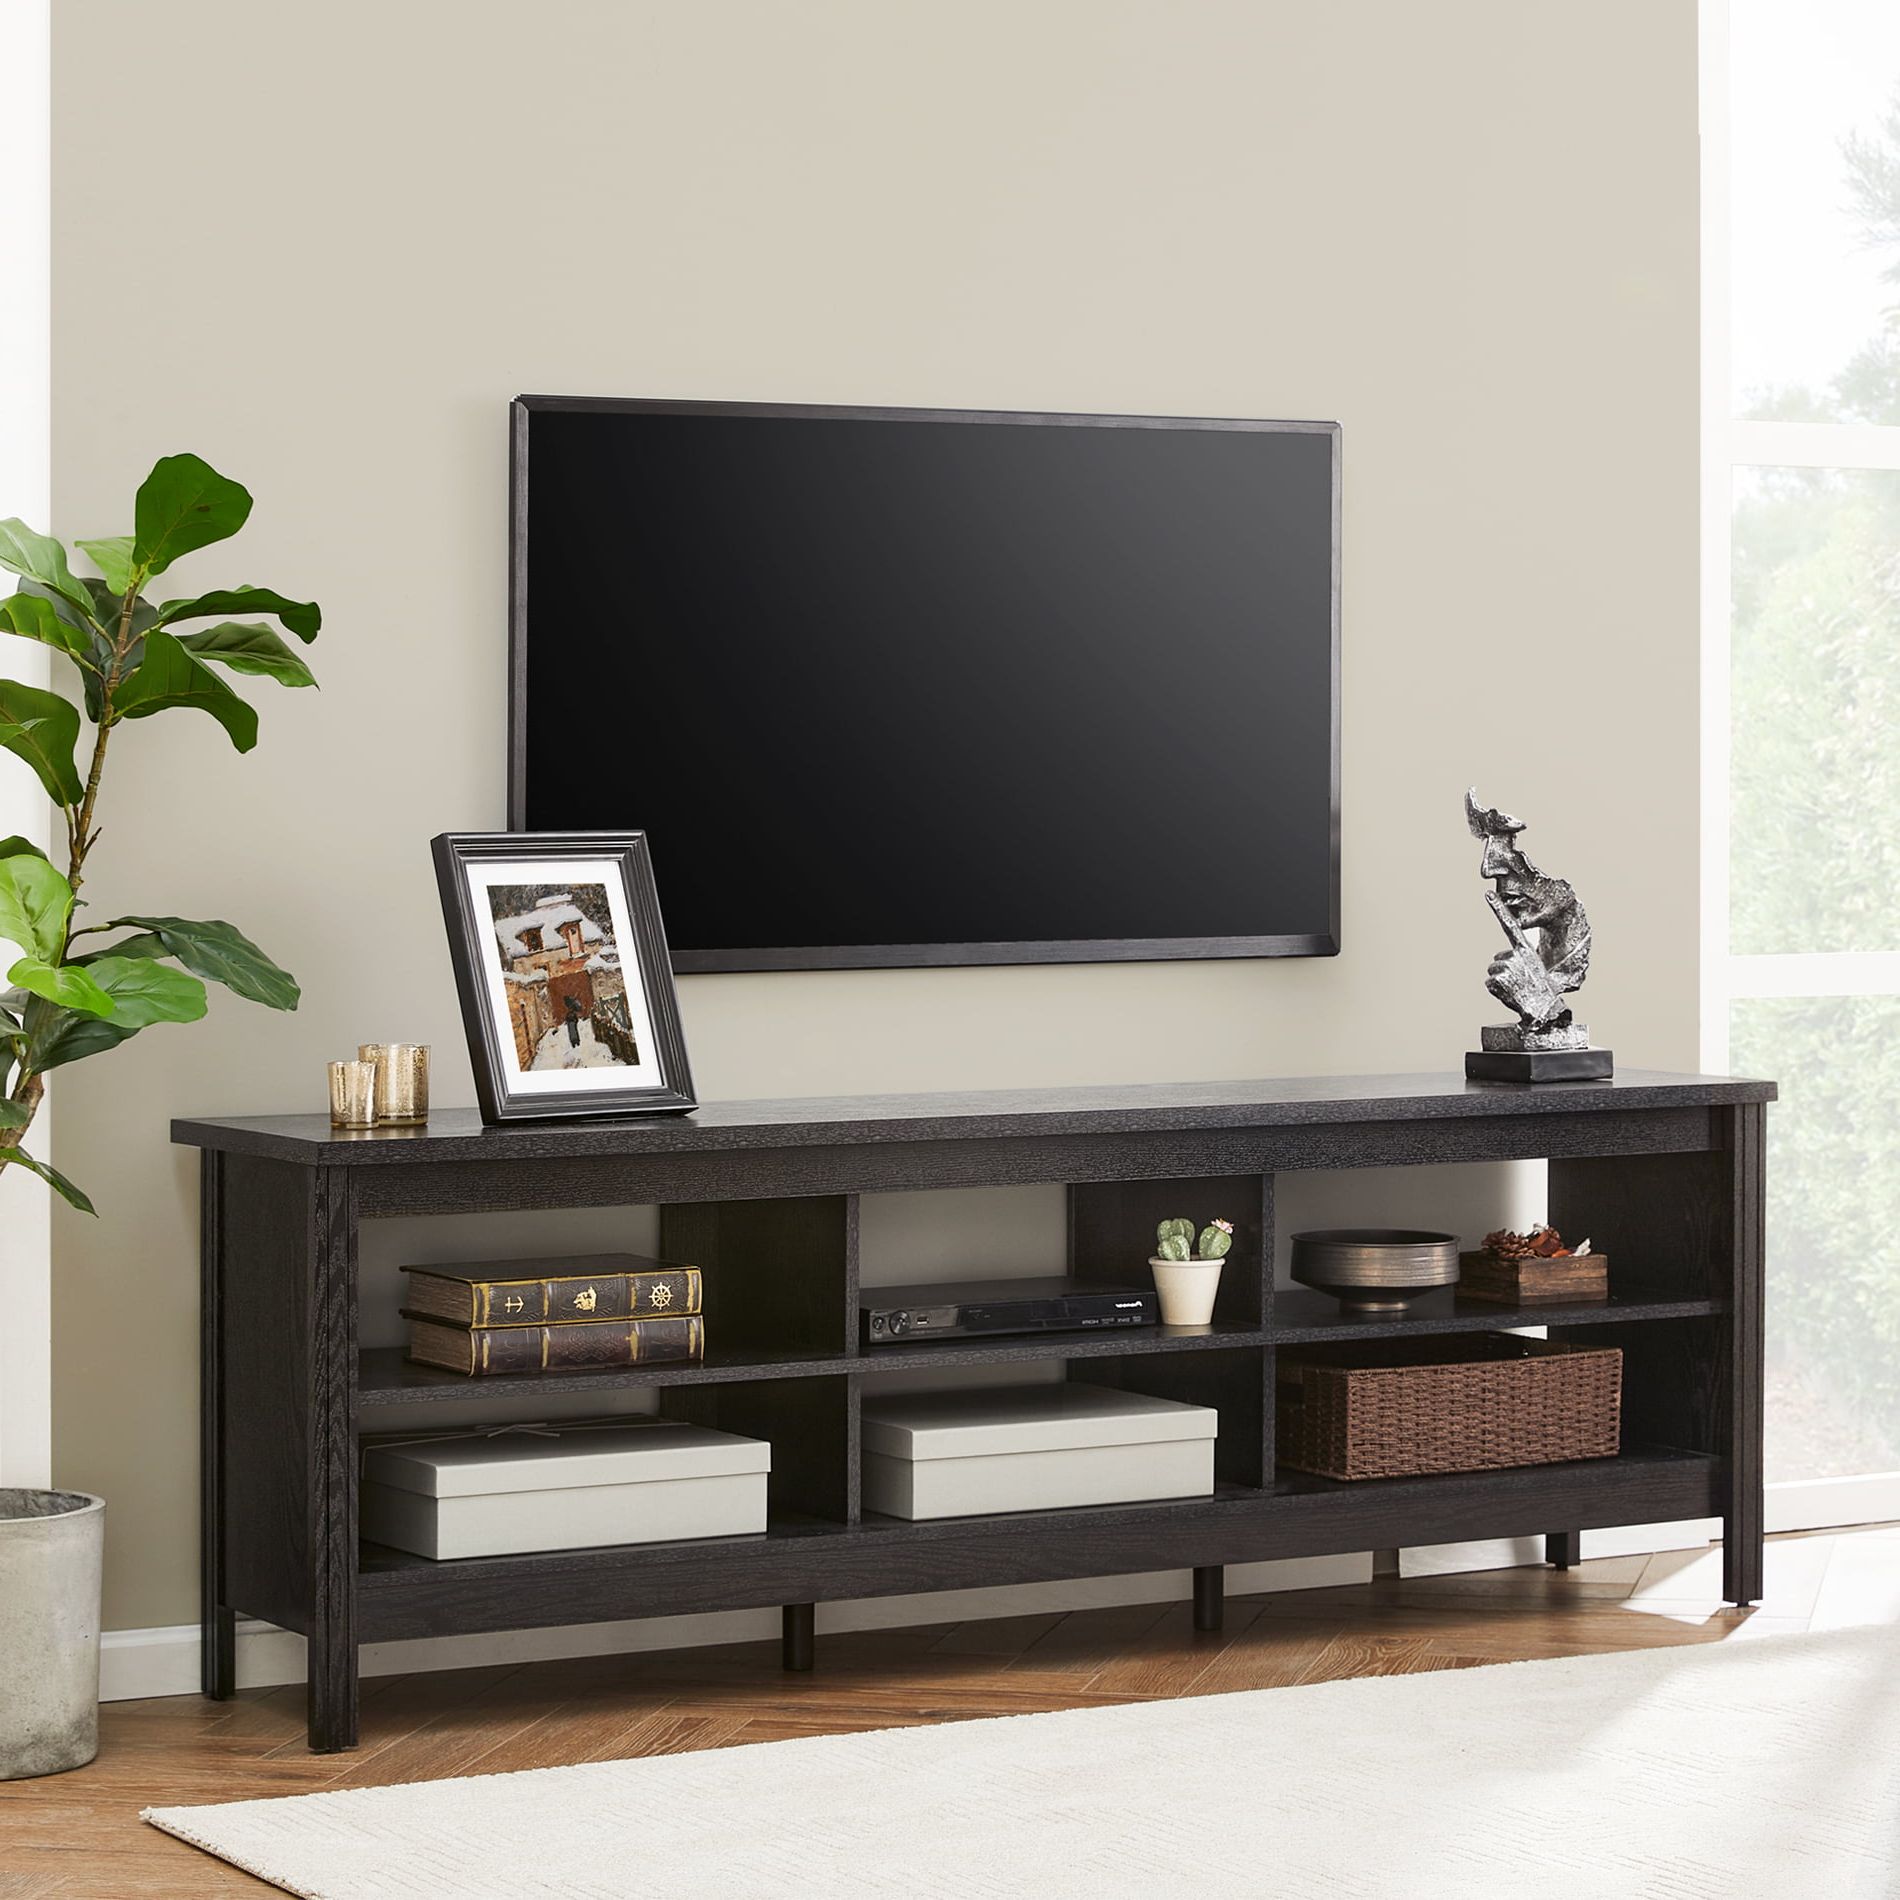 Farmhouse Tv Stands For 75 Inch Flat Screen Media Console Storage Regarding Widely Used Media Entertainment Center Tv Stands (View 5 of 15)